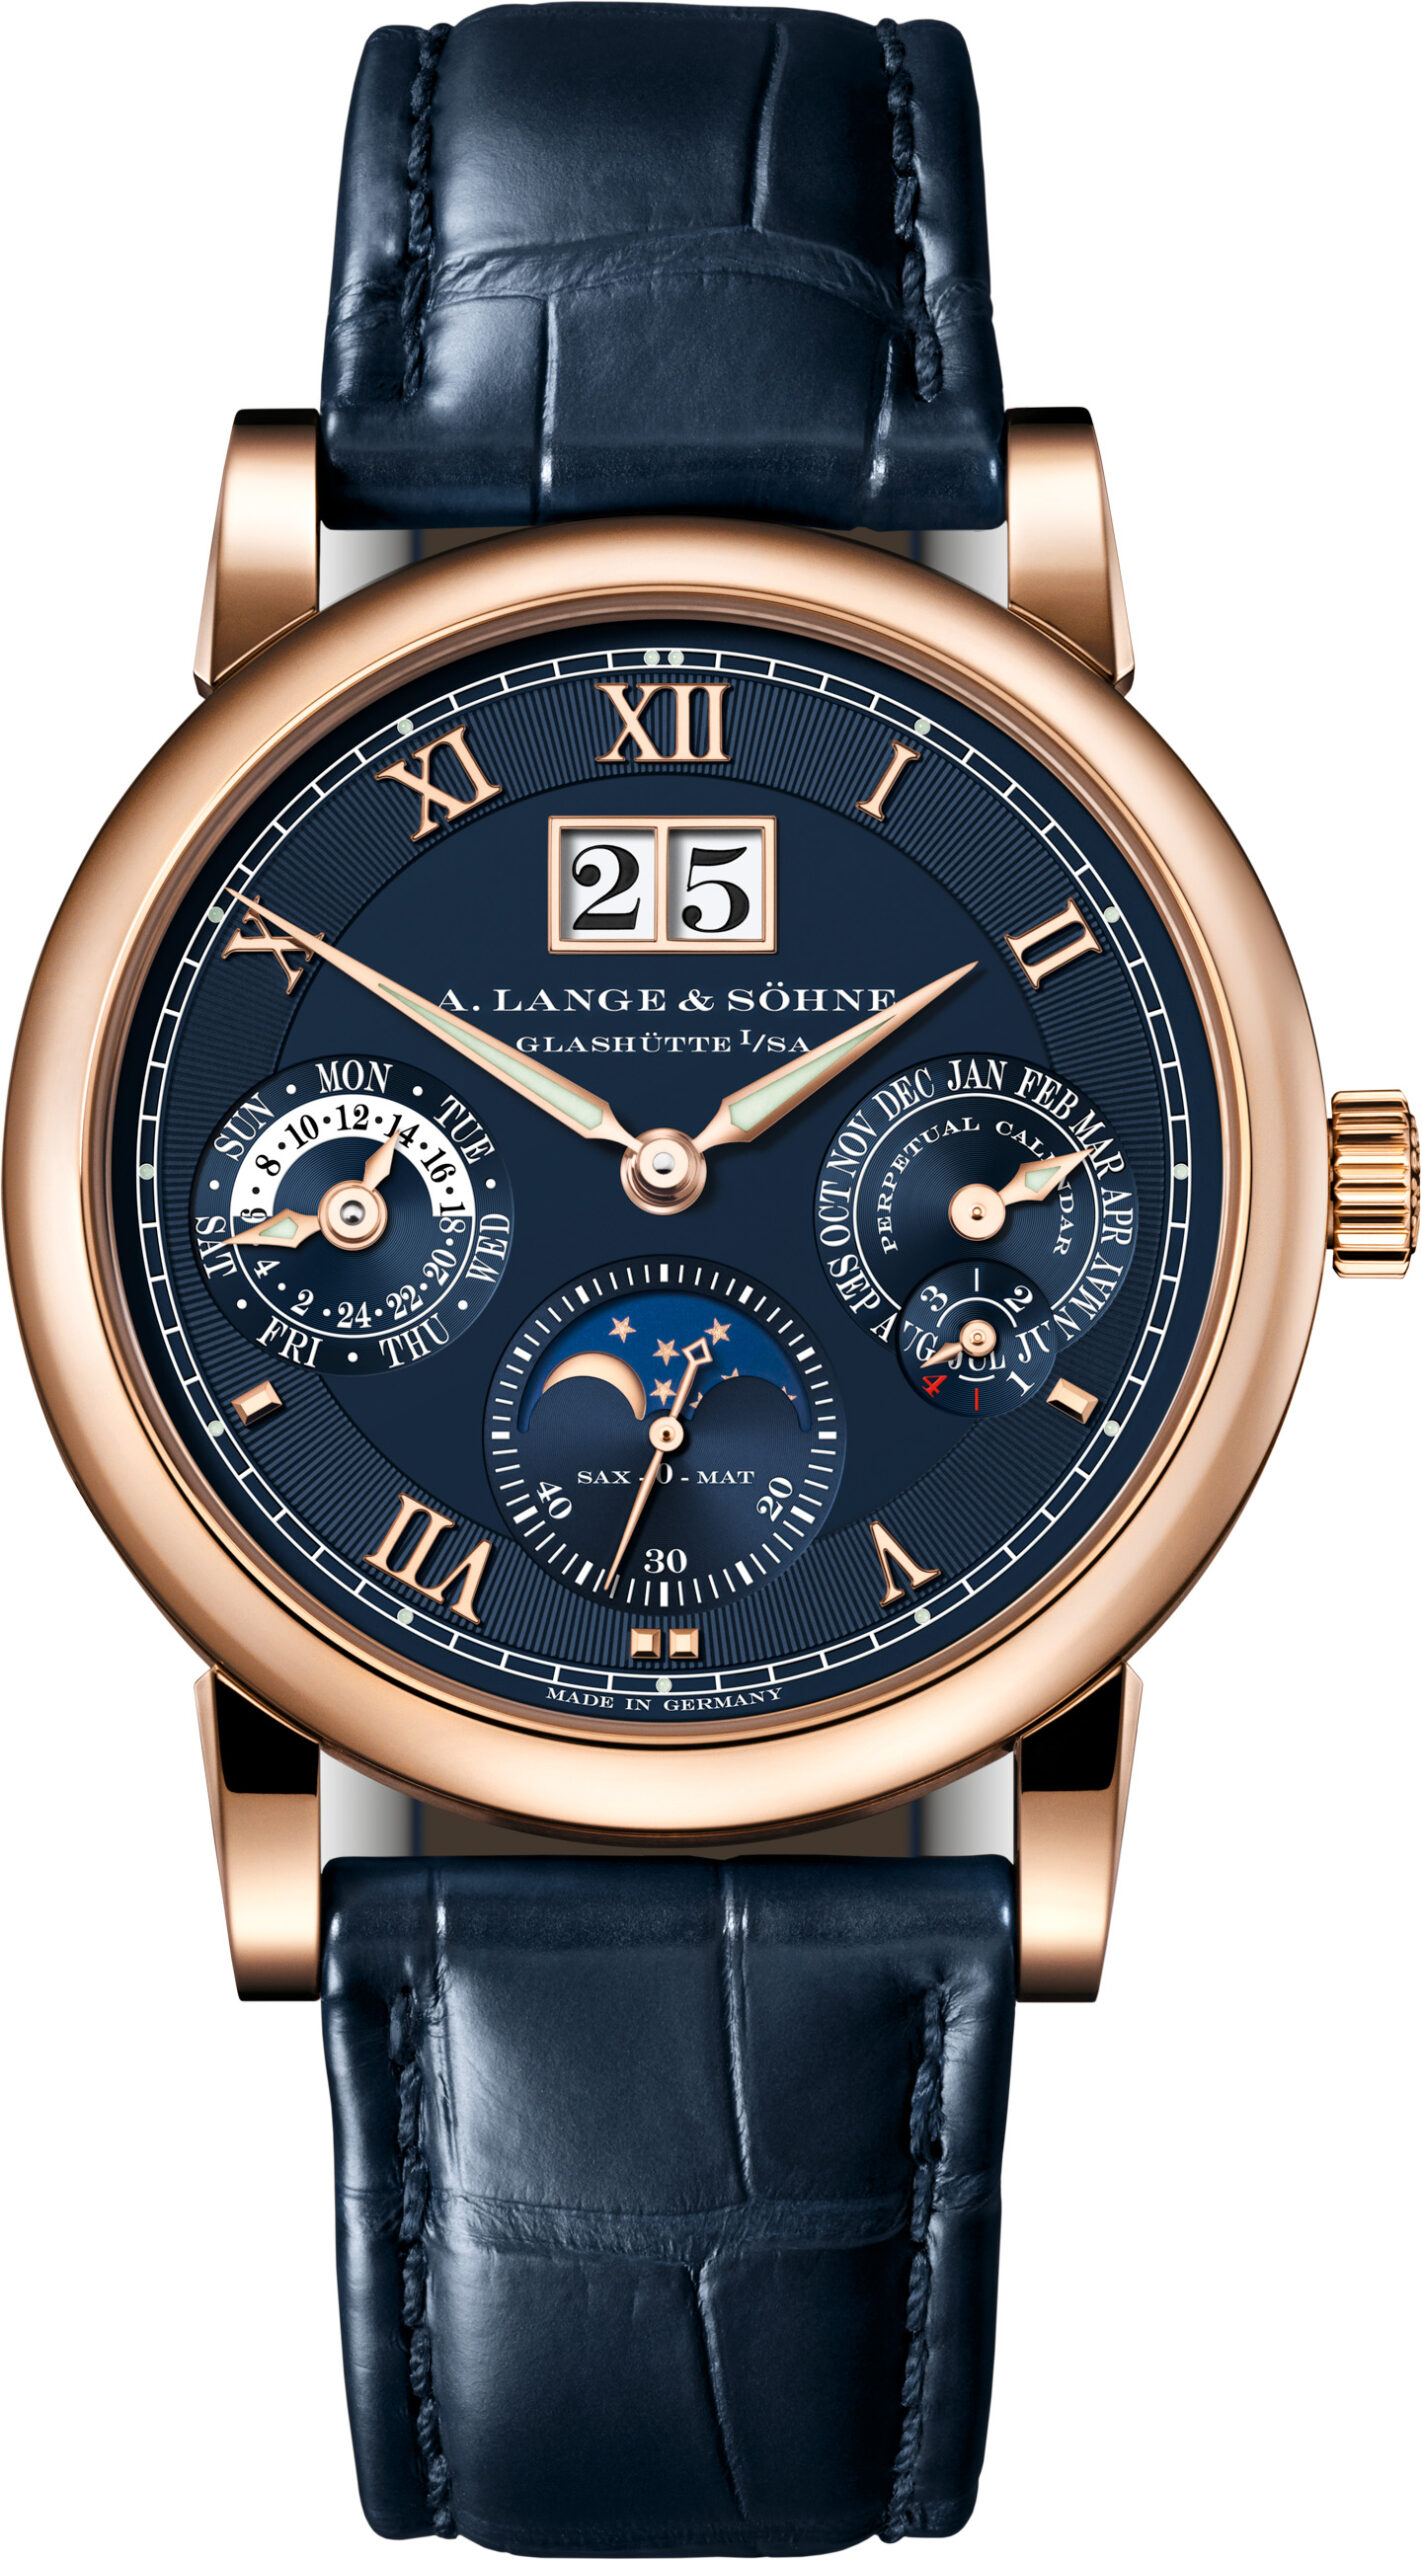 https://www.ablogtowatch.com/wp-content/uploads/2021/07/A-Lange-Sohne-Langematik-Perpetual-blue-limited-edition-watches-4-scaled.jpg